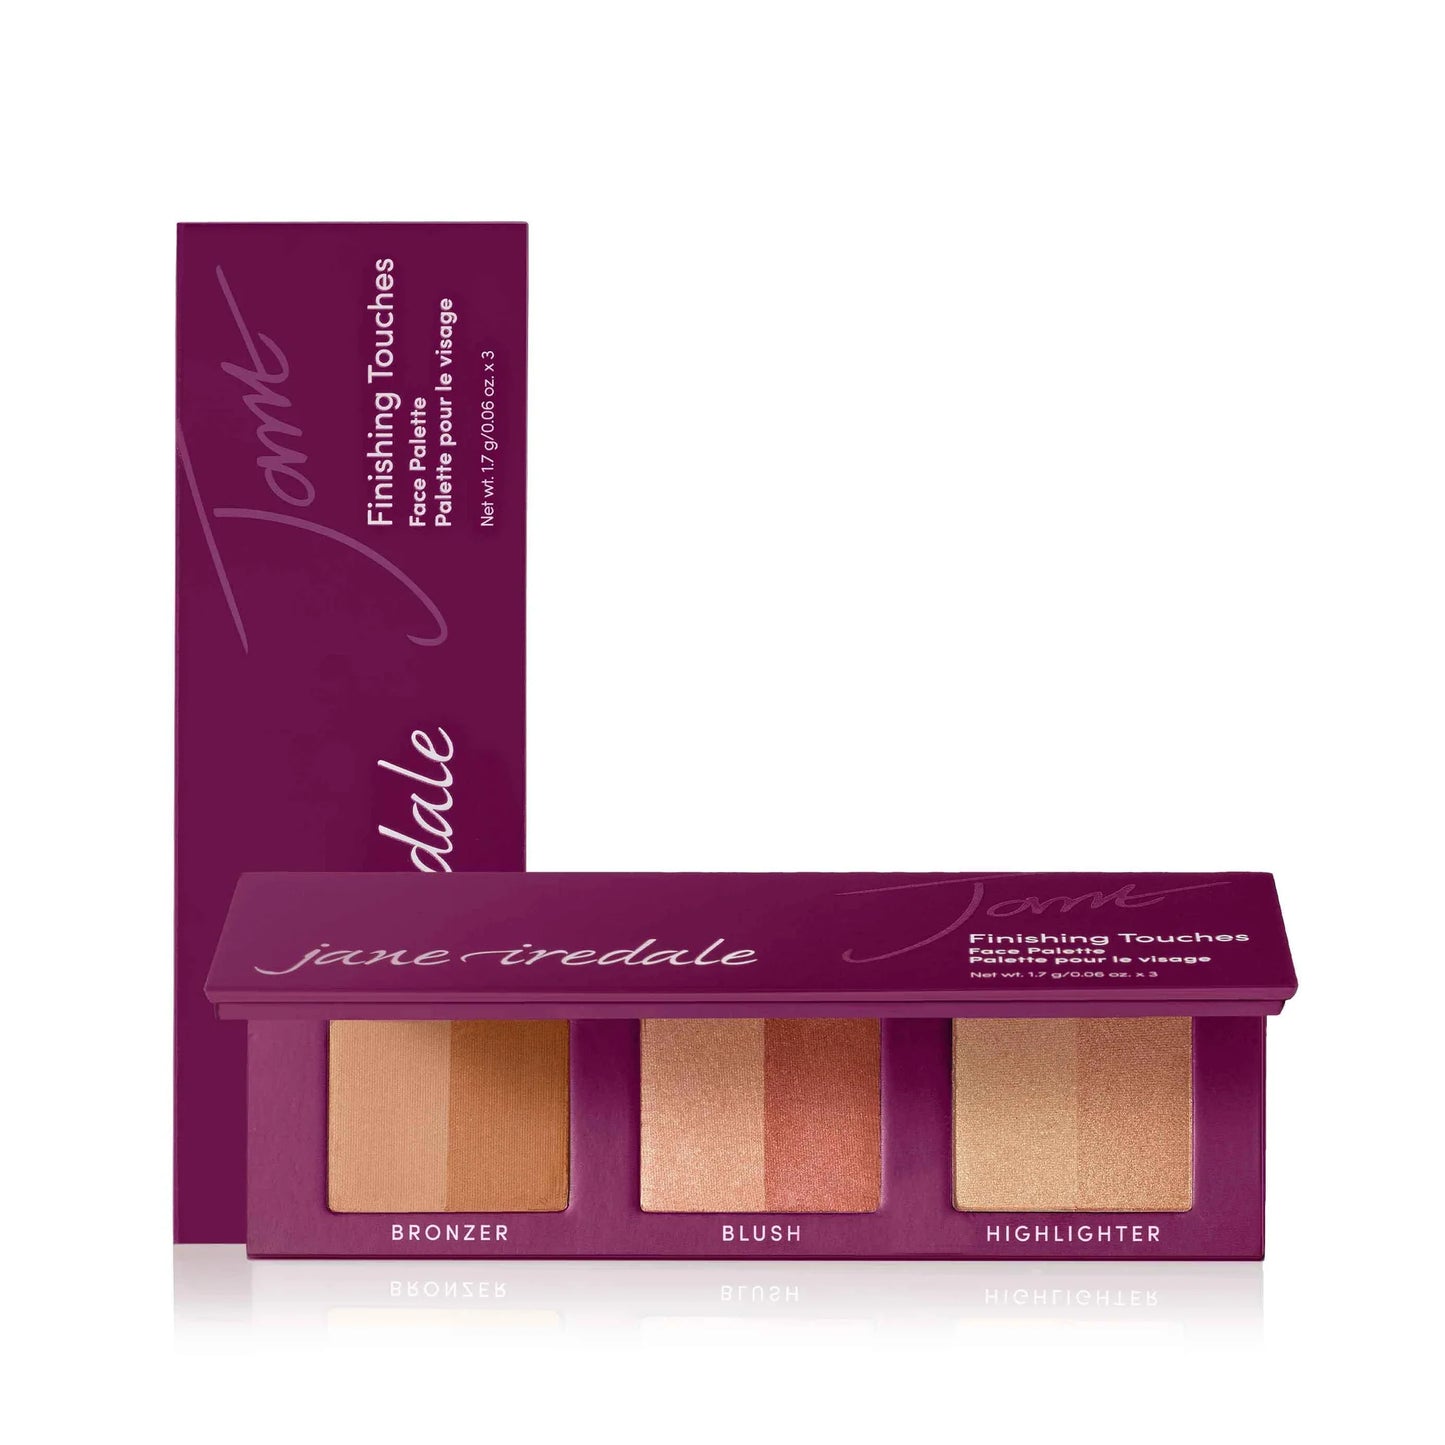 Jane Iredale Finishing Touches Palette